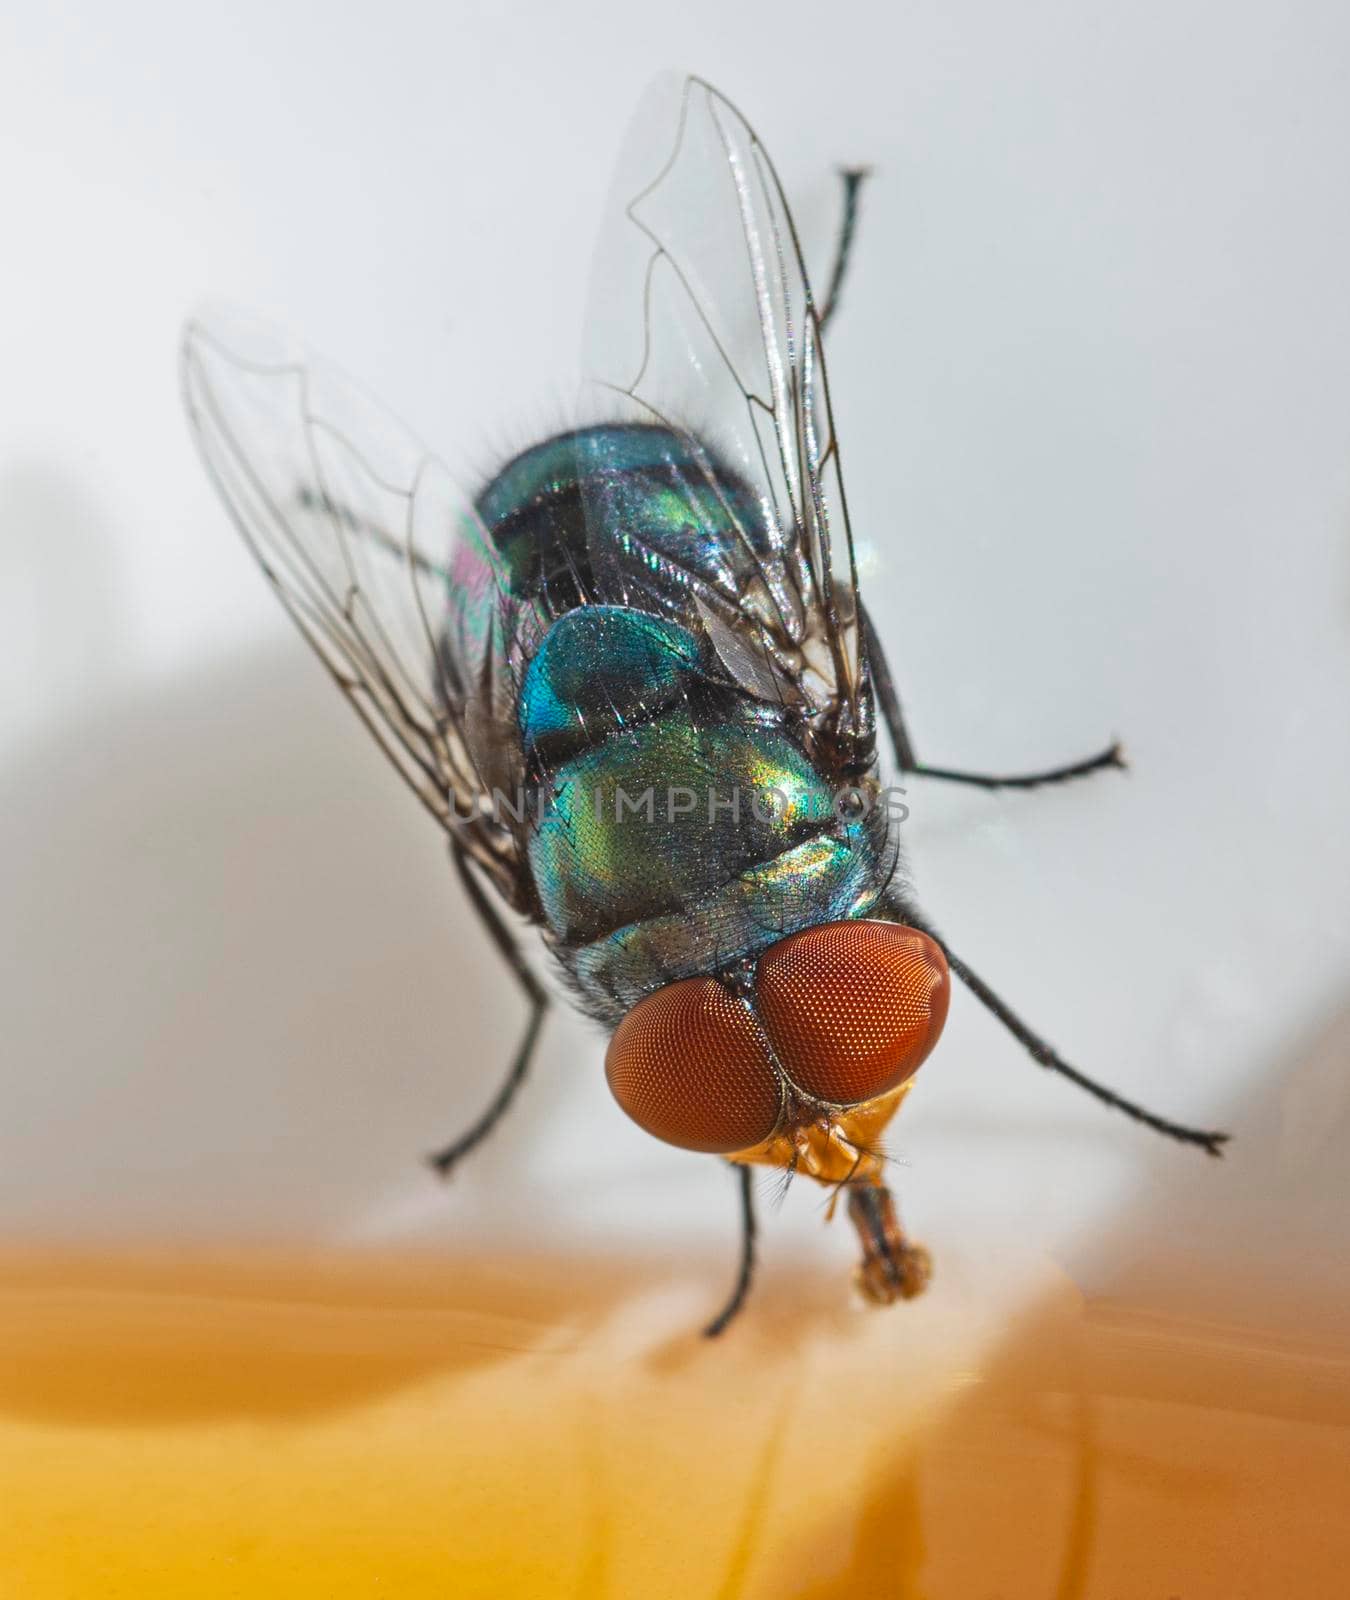 Close-up detail of a green bottle fly lucilia sericata feeding on honey in a white bowl